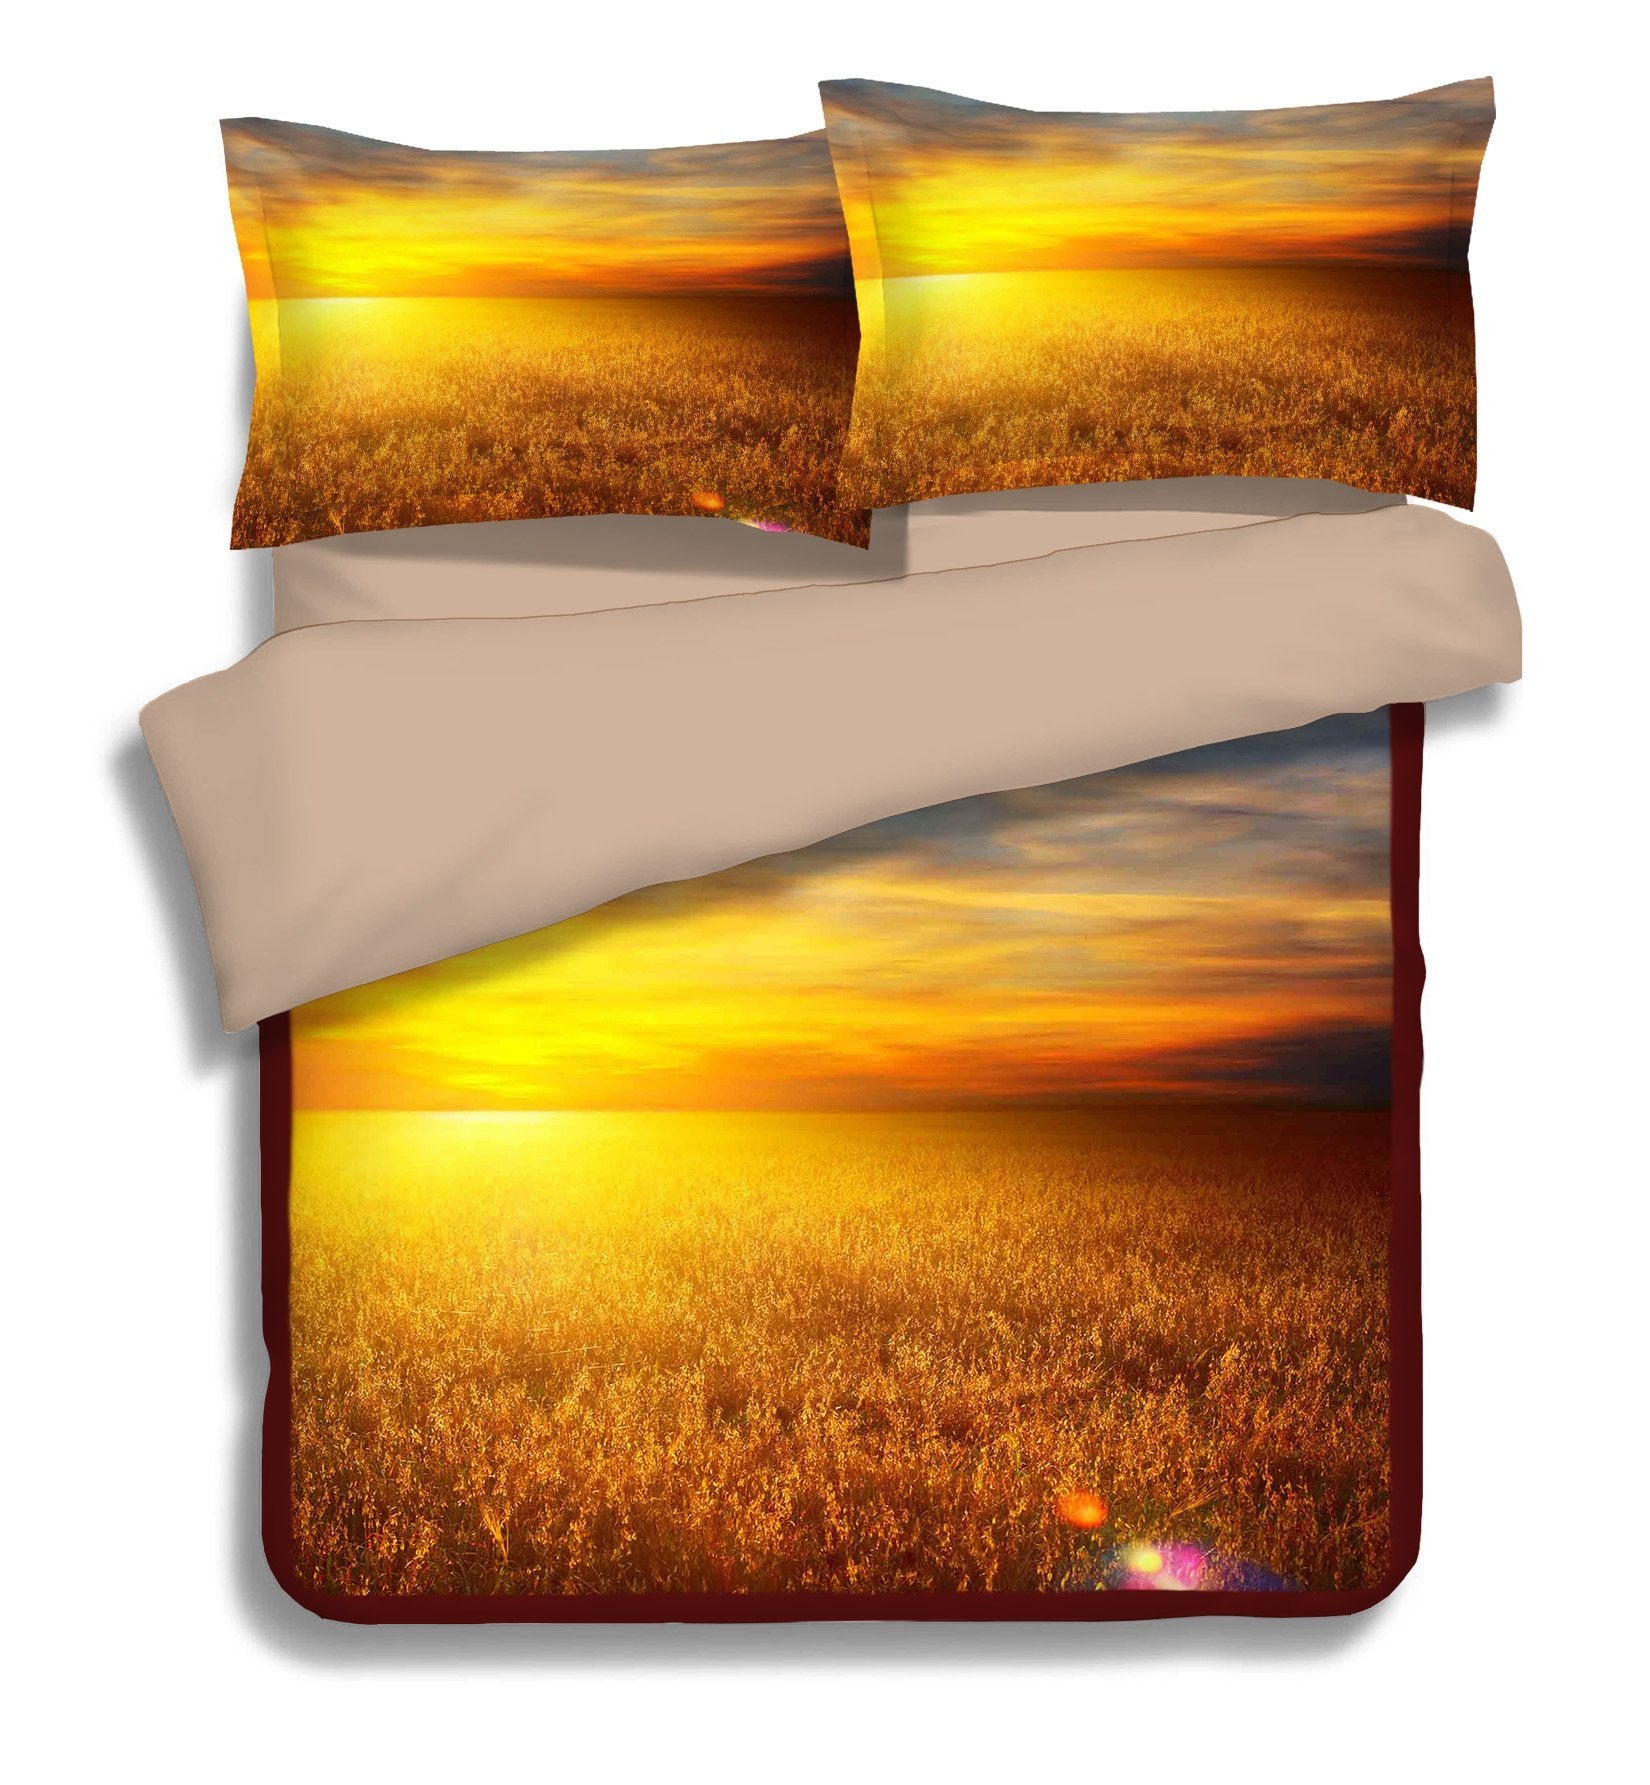 3D Gold Wheat 142 Bed Pillowcases Quilt